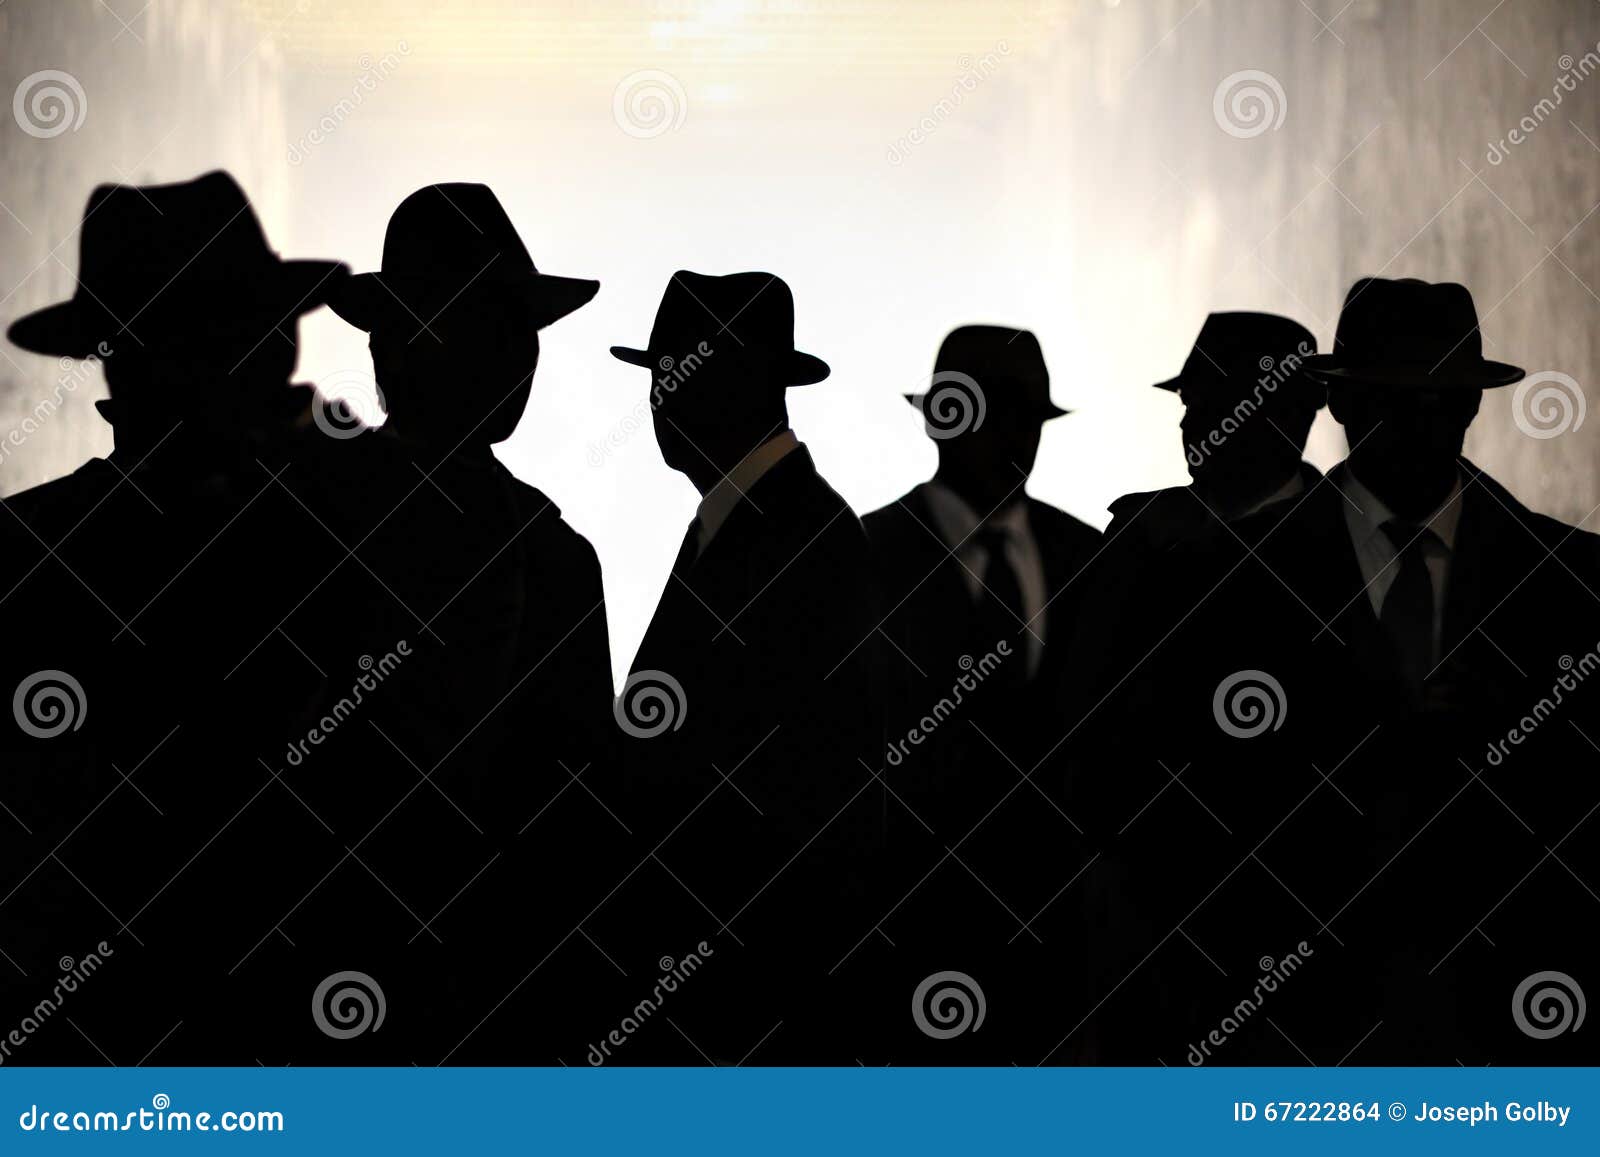 men in fedora hats silhouette. security, privacy, surveillance concept.